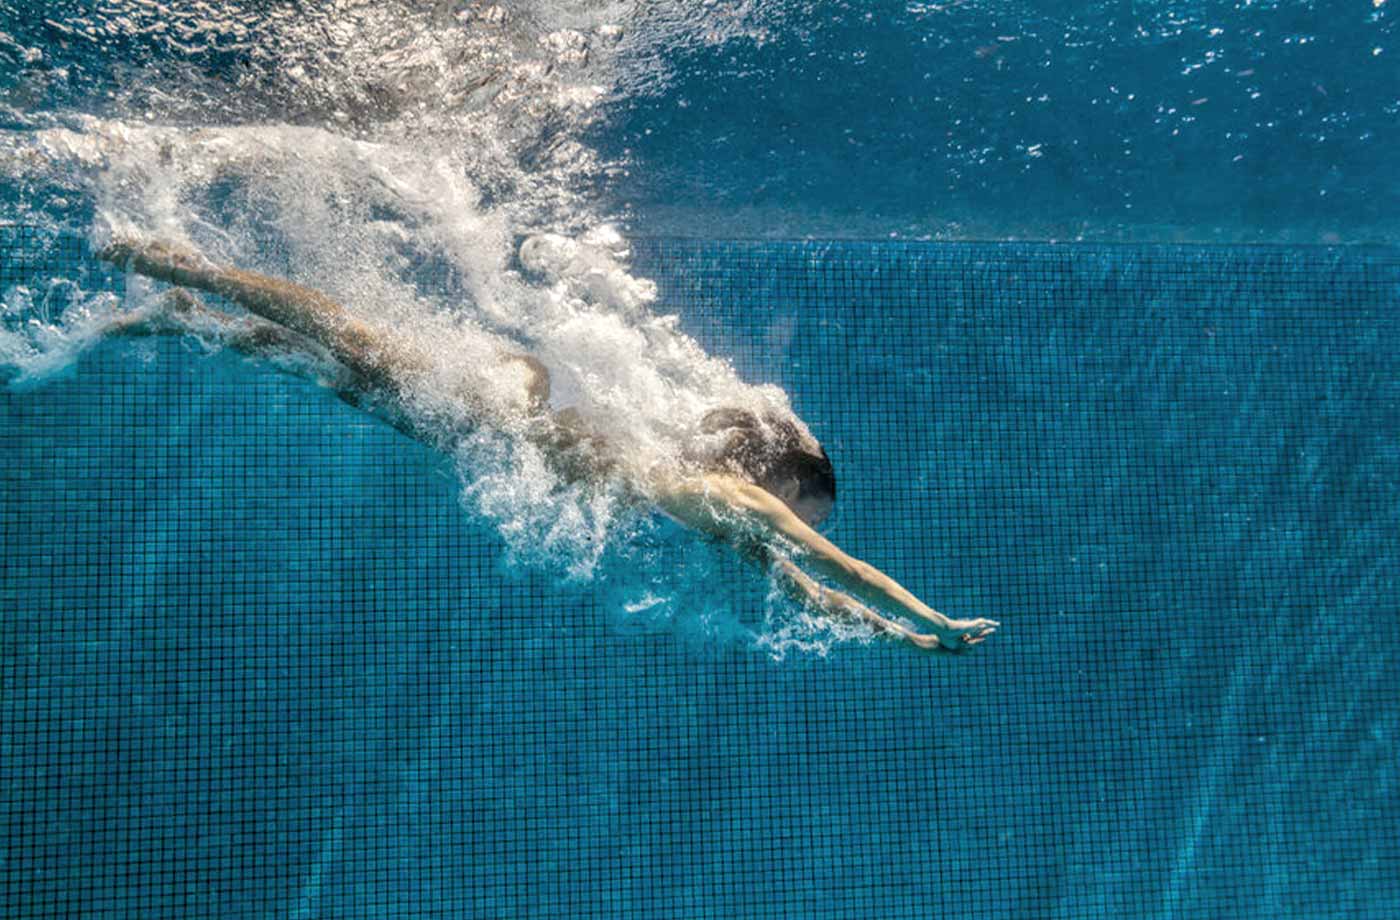 7 benefits of swimming that will make you want to splurge on an indoor pool membership, stat